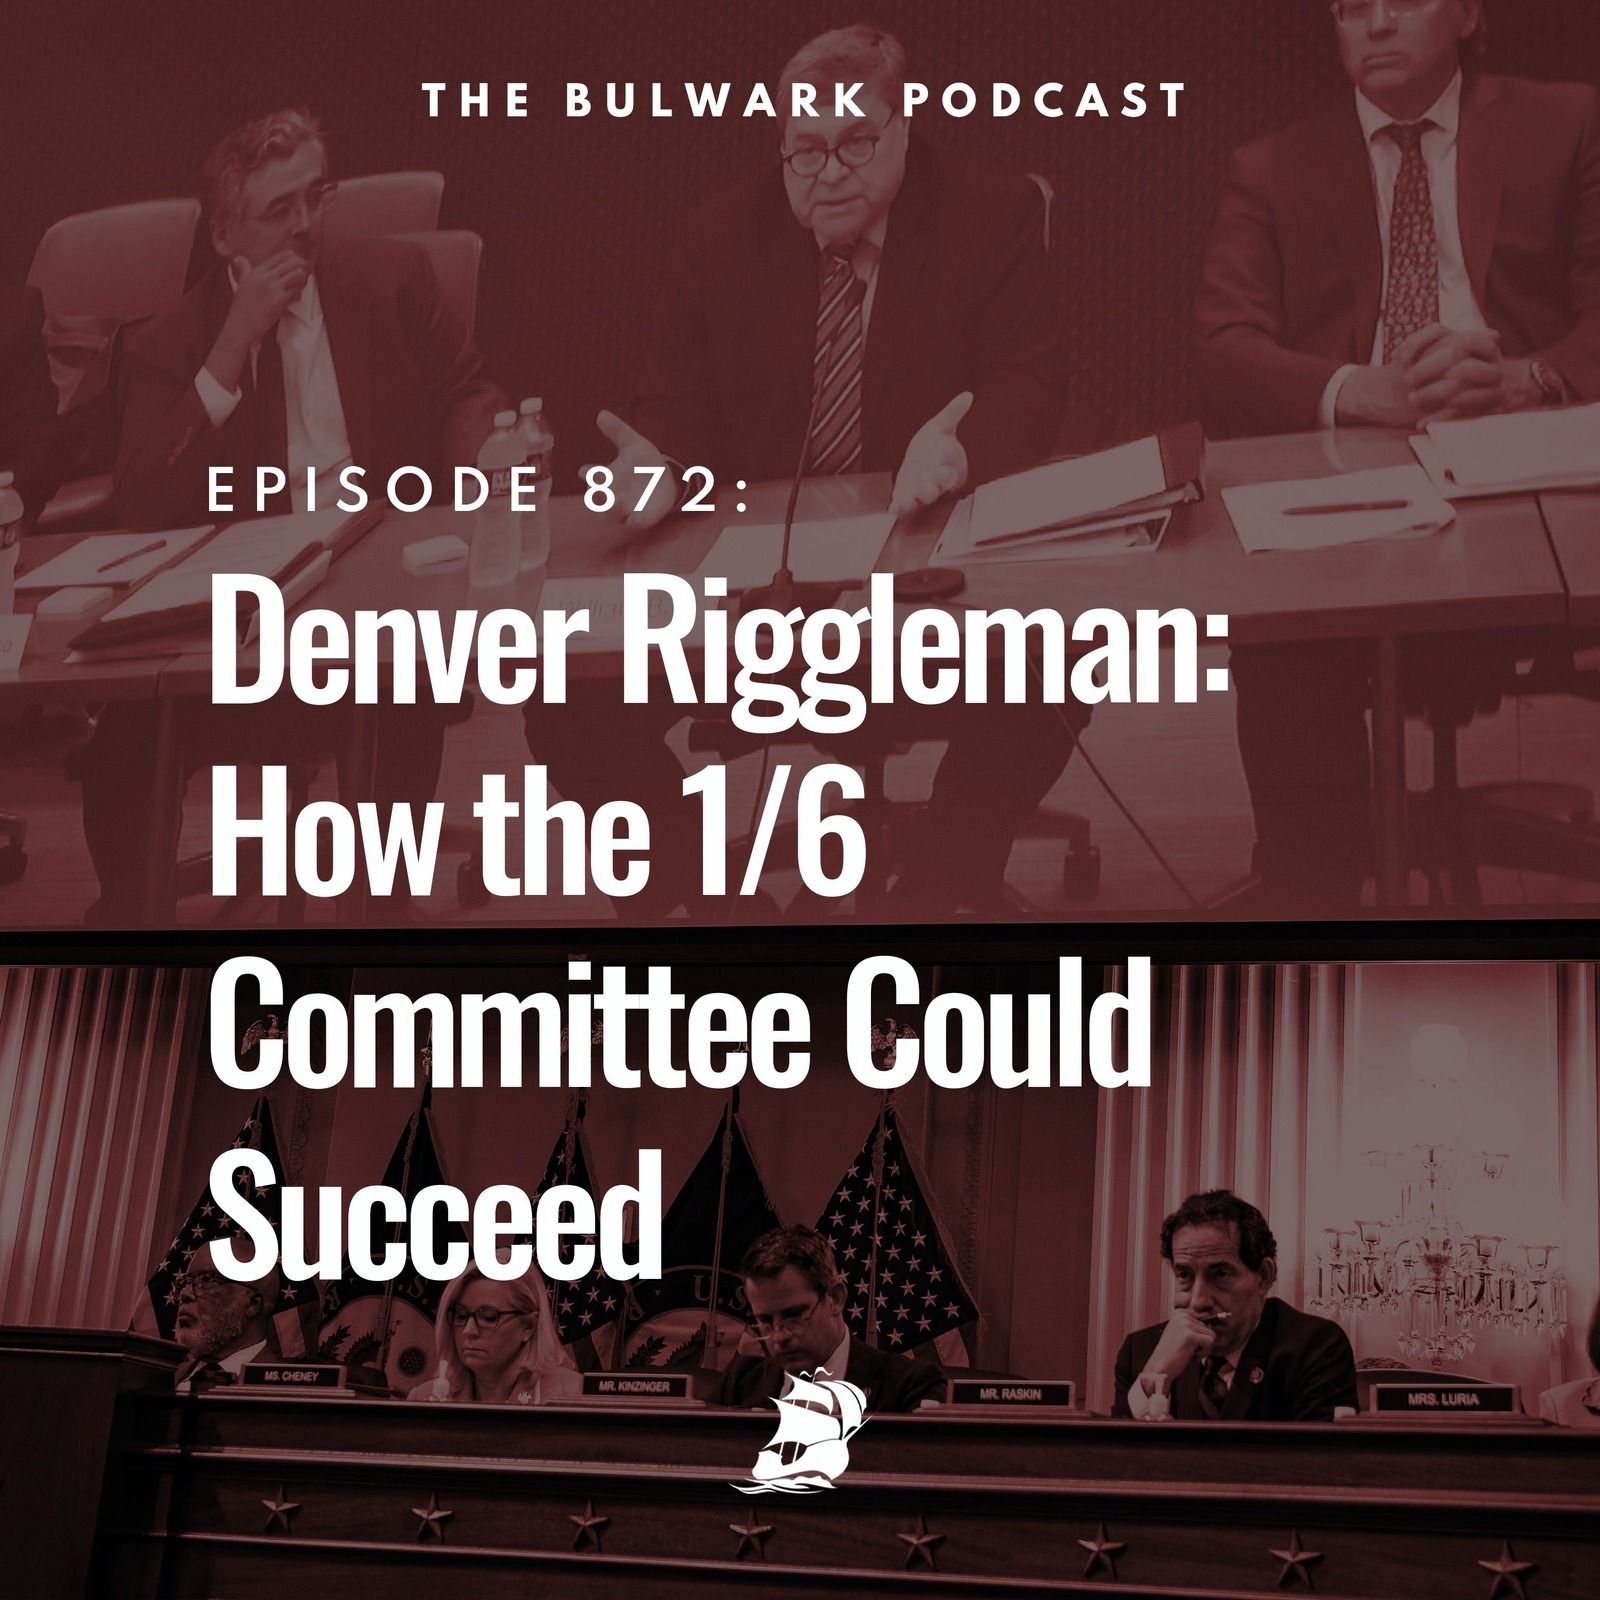 Denver Riggleman: How the 1/6 Committee could succeed by The Bulwark Podcast